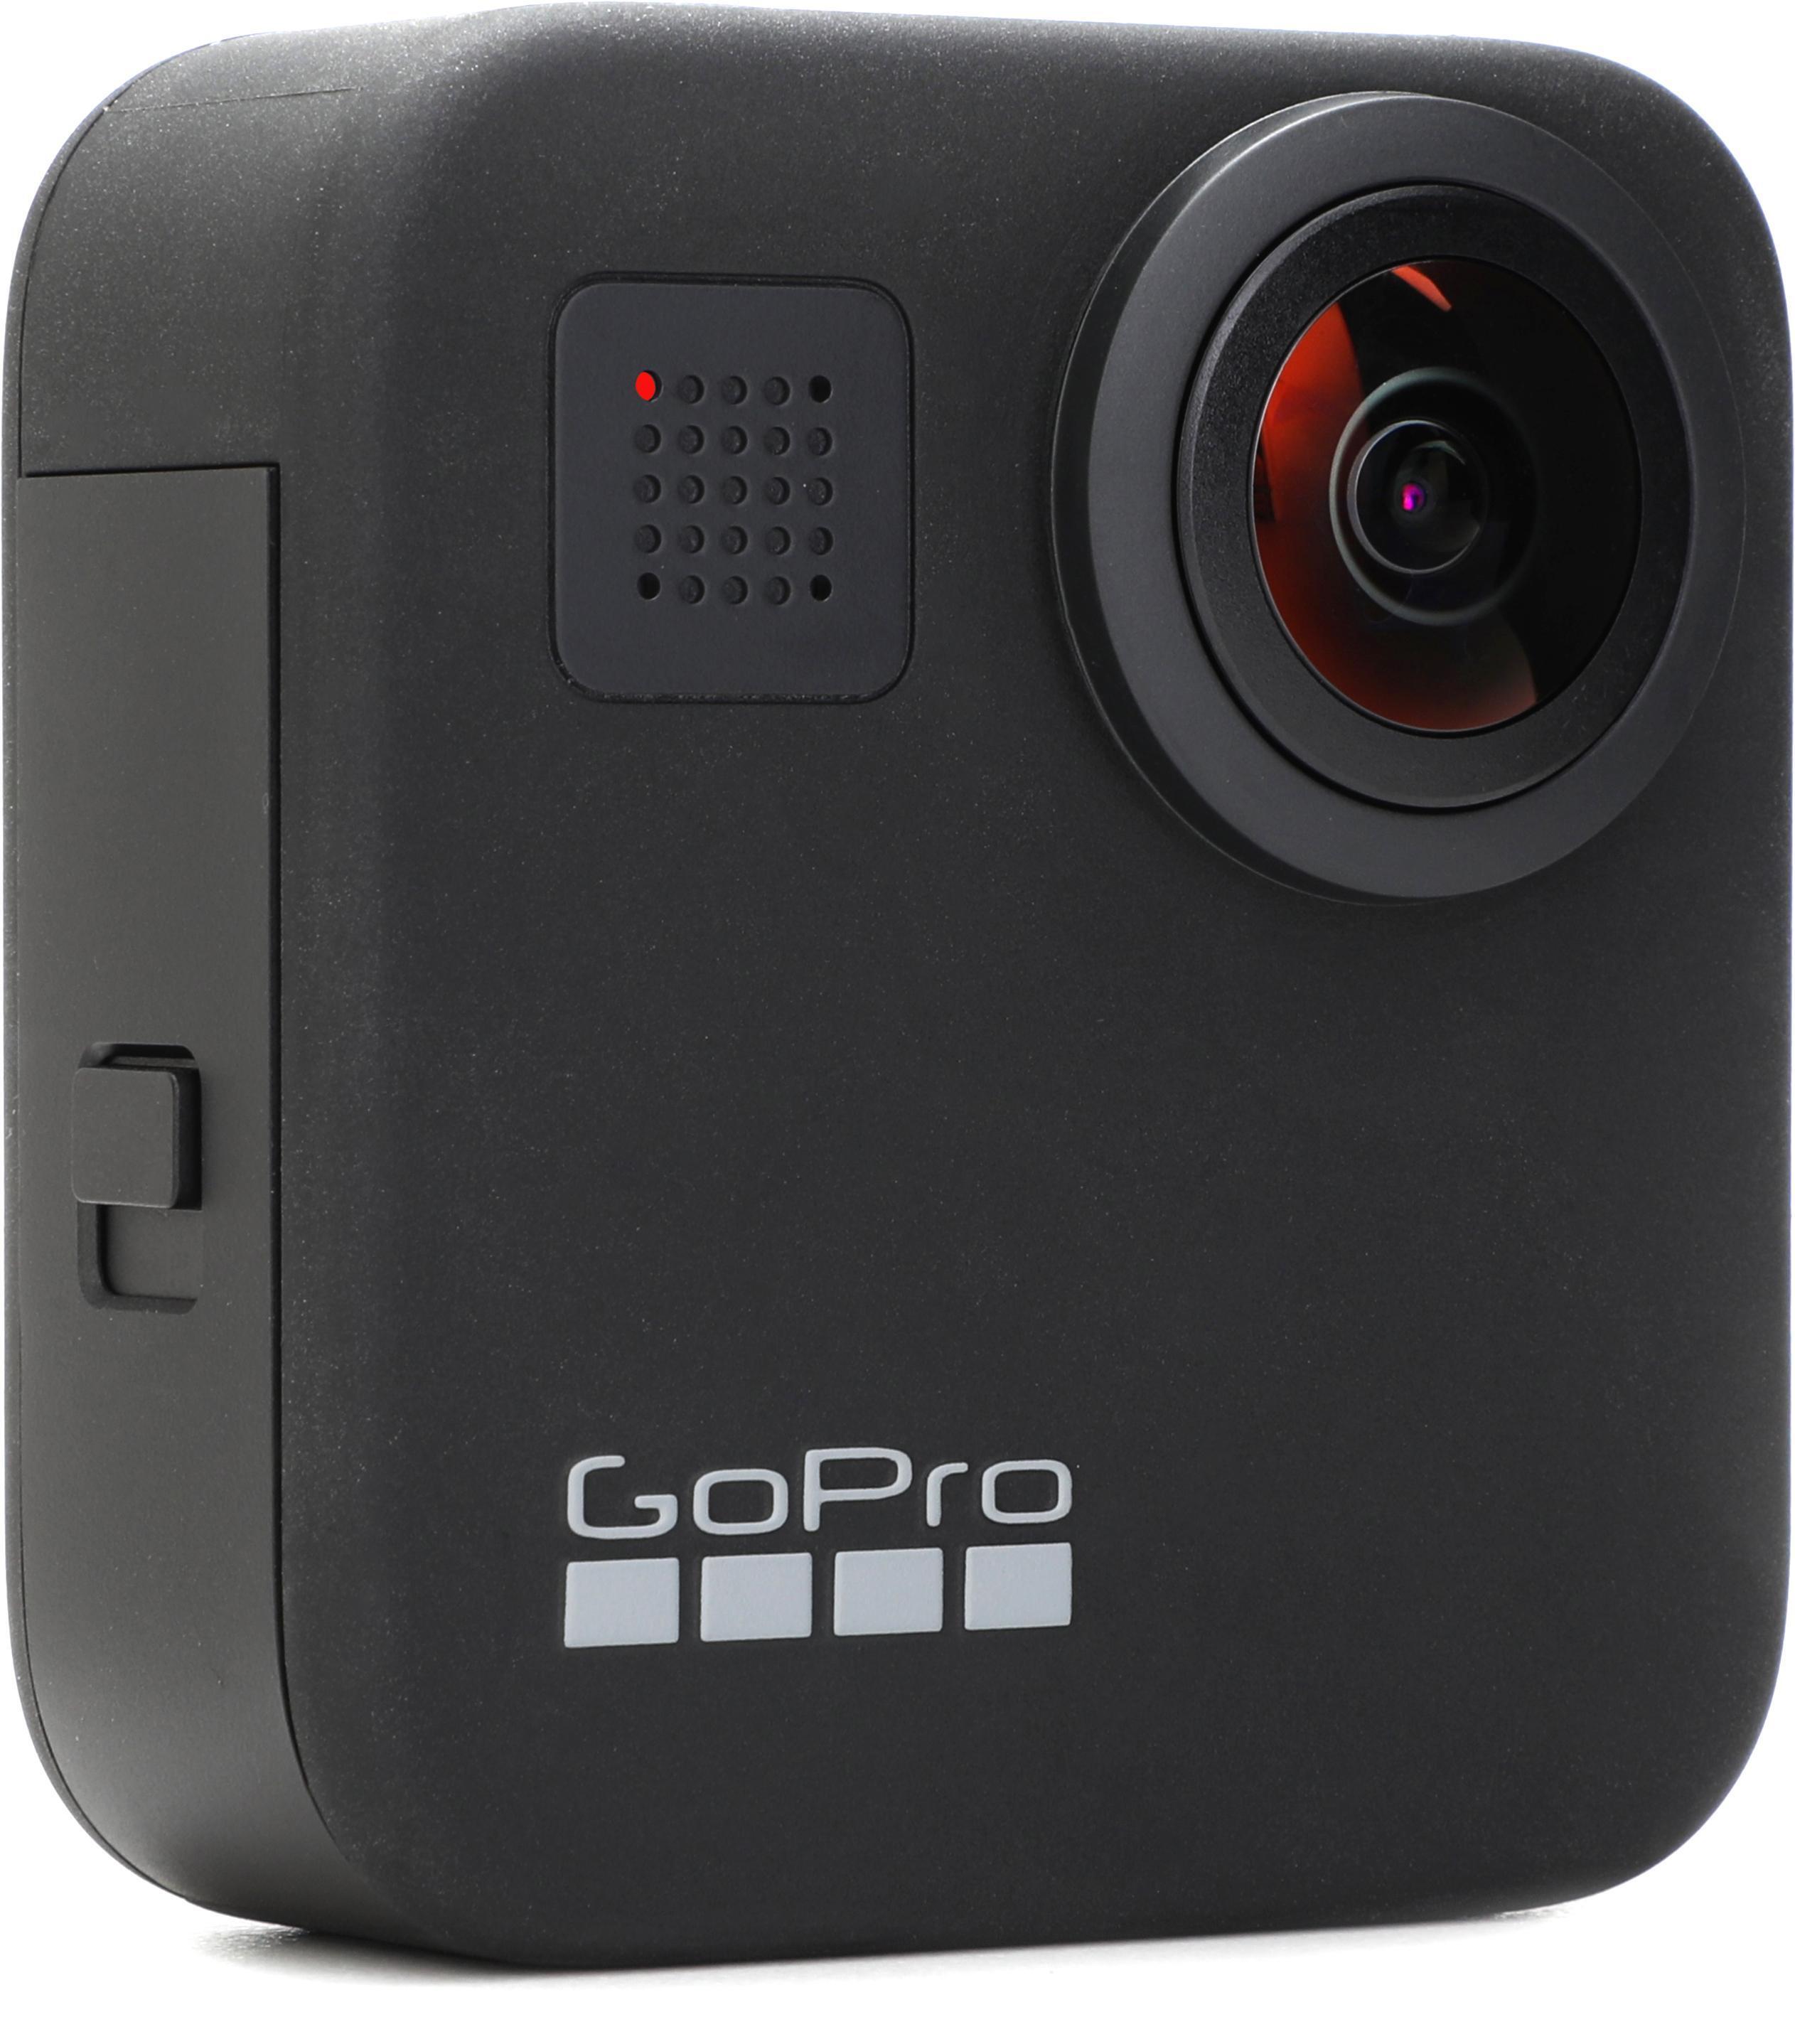 GoPro MAX review: GoPro's Second, Much-Improved 360 Camera